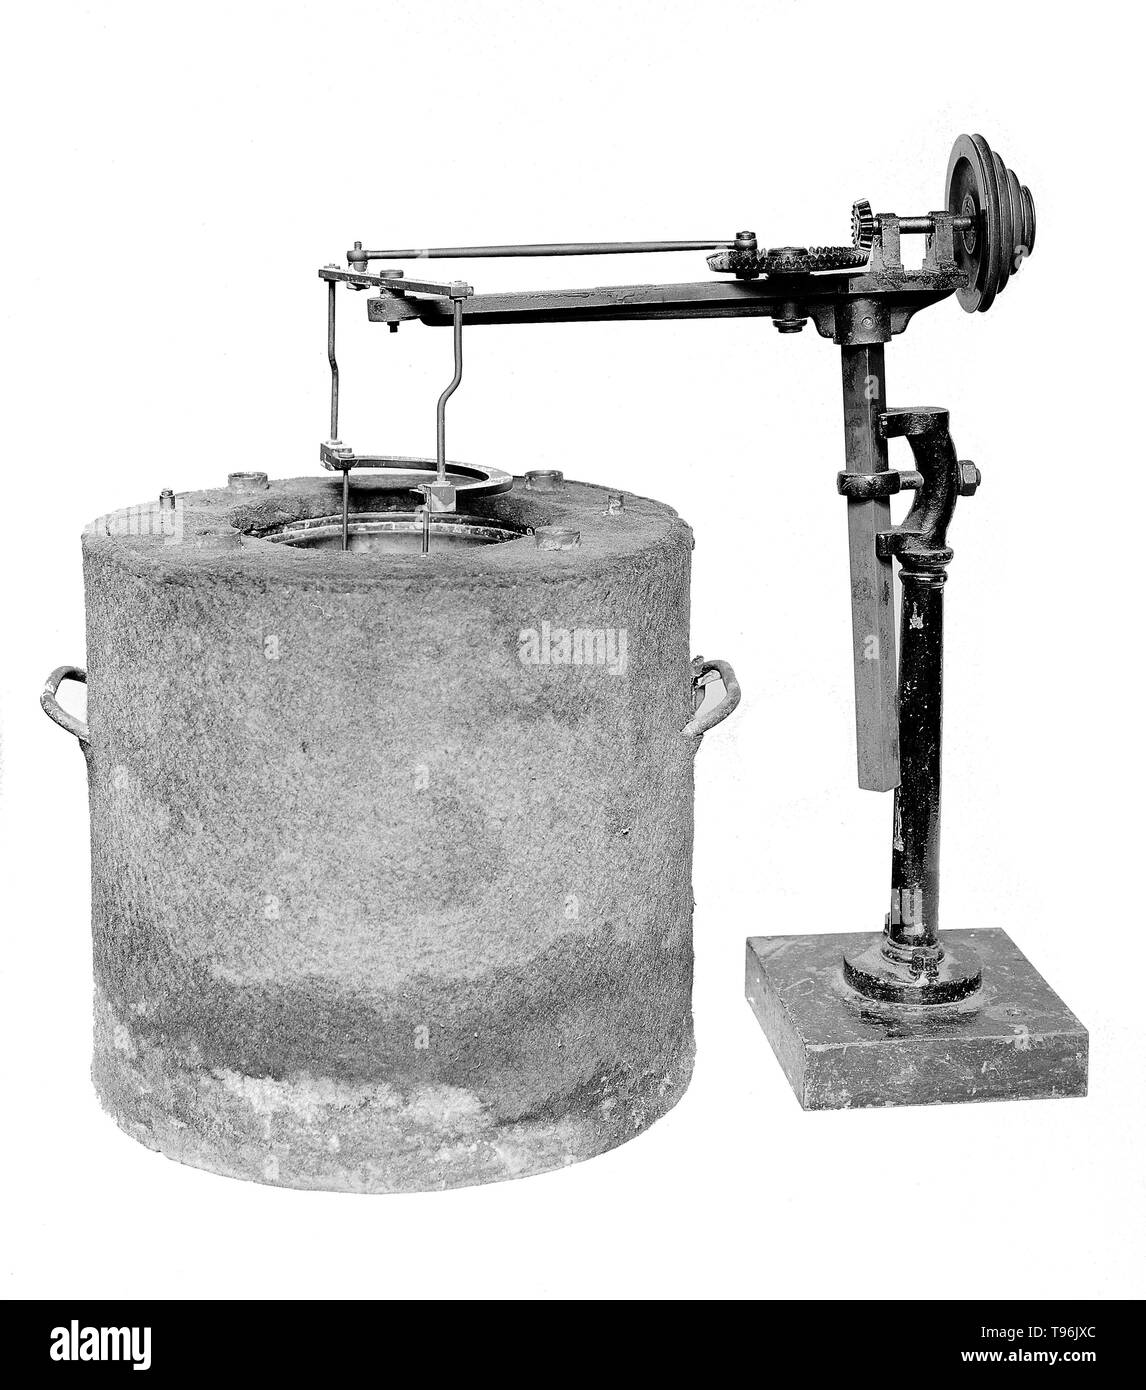 Calorimeter designed and used by Berthelot for determining heat developed in chemical reactions. Pierre Eugène Marcellin Berthelot (October 25, 1827 - March 18, 1907) was a French chemist and politician noted for the Thomsen-Berthelot principle of thermochemistry which argued that all chemical changes are accompanied by the production of heat and that processes which occur will be ones in which the most heat is produced. Stock Photo